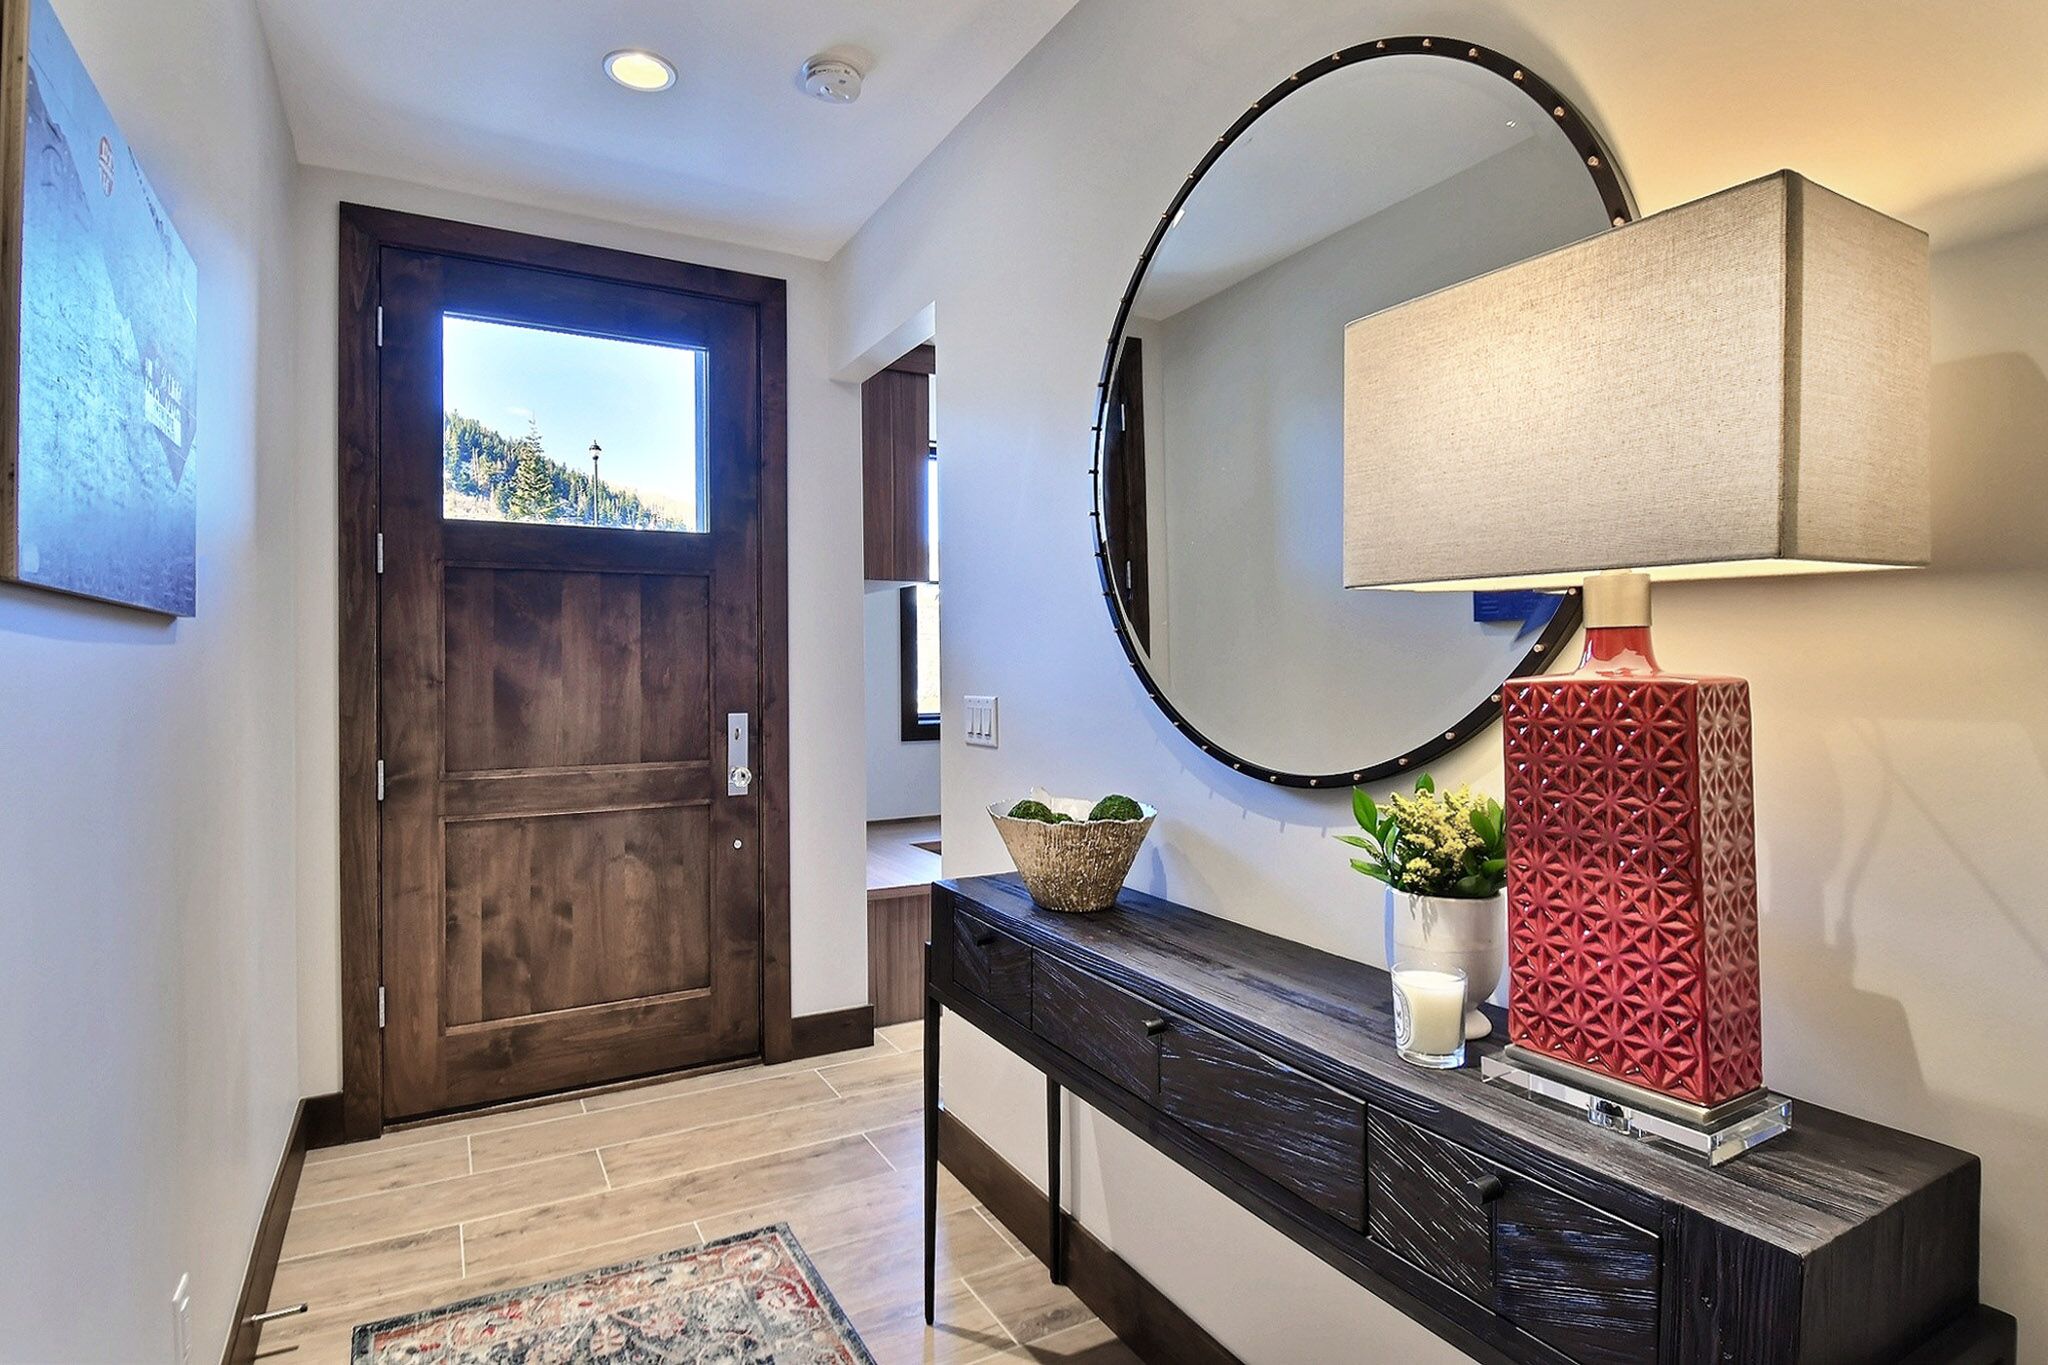 Step into the warm, radient, heated foyer and onto the private elevator.